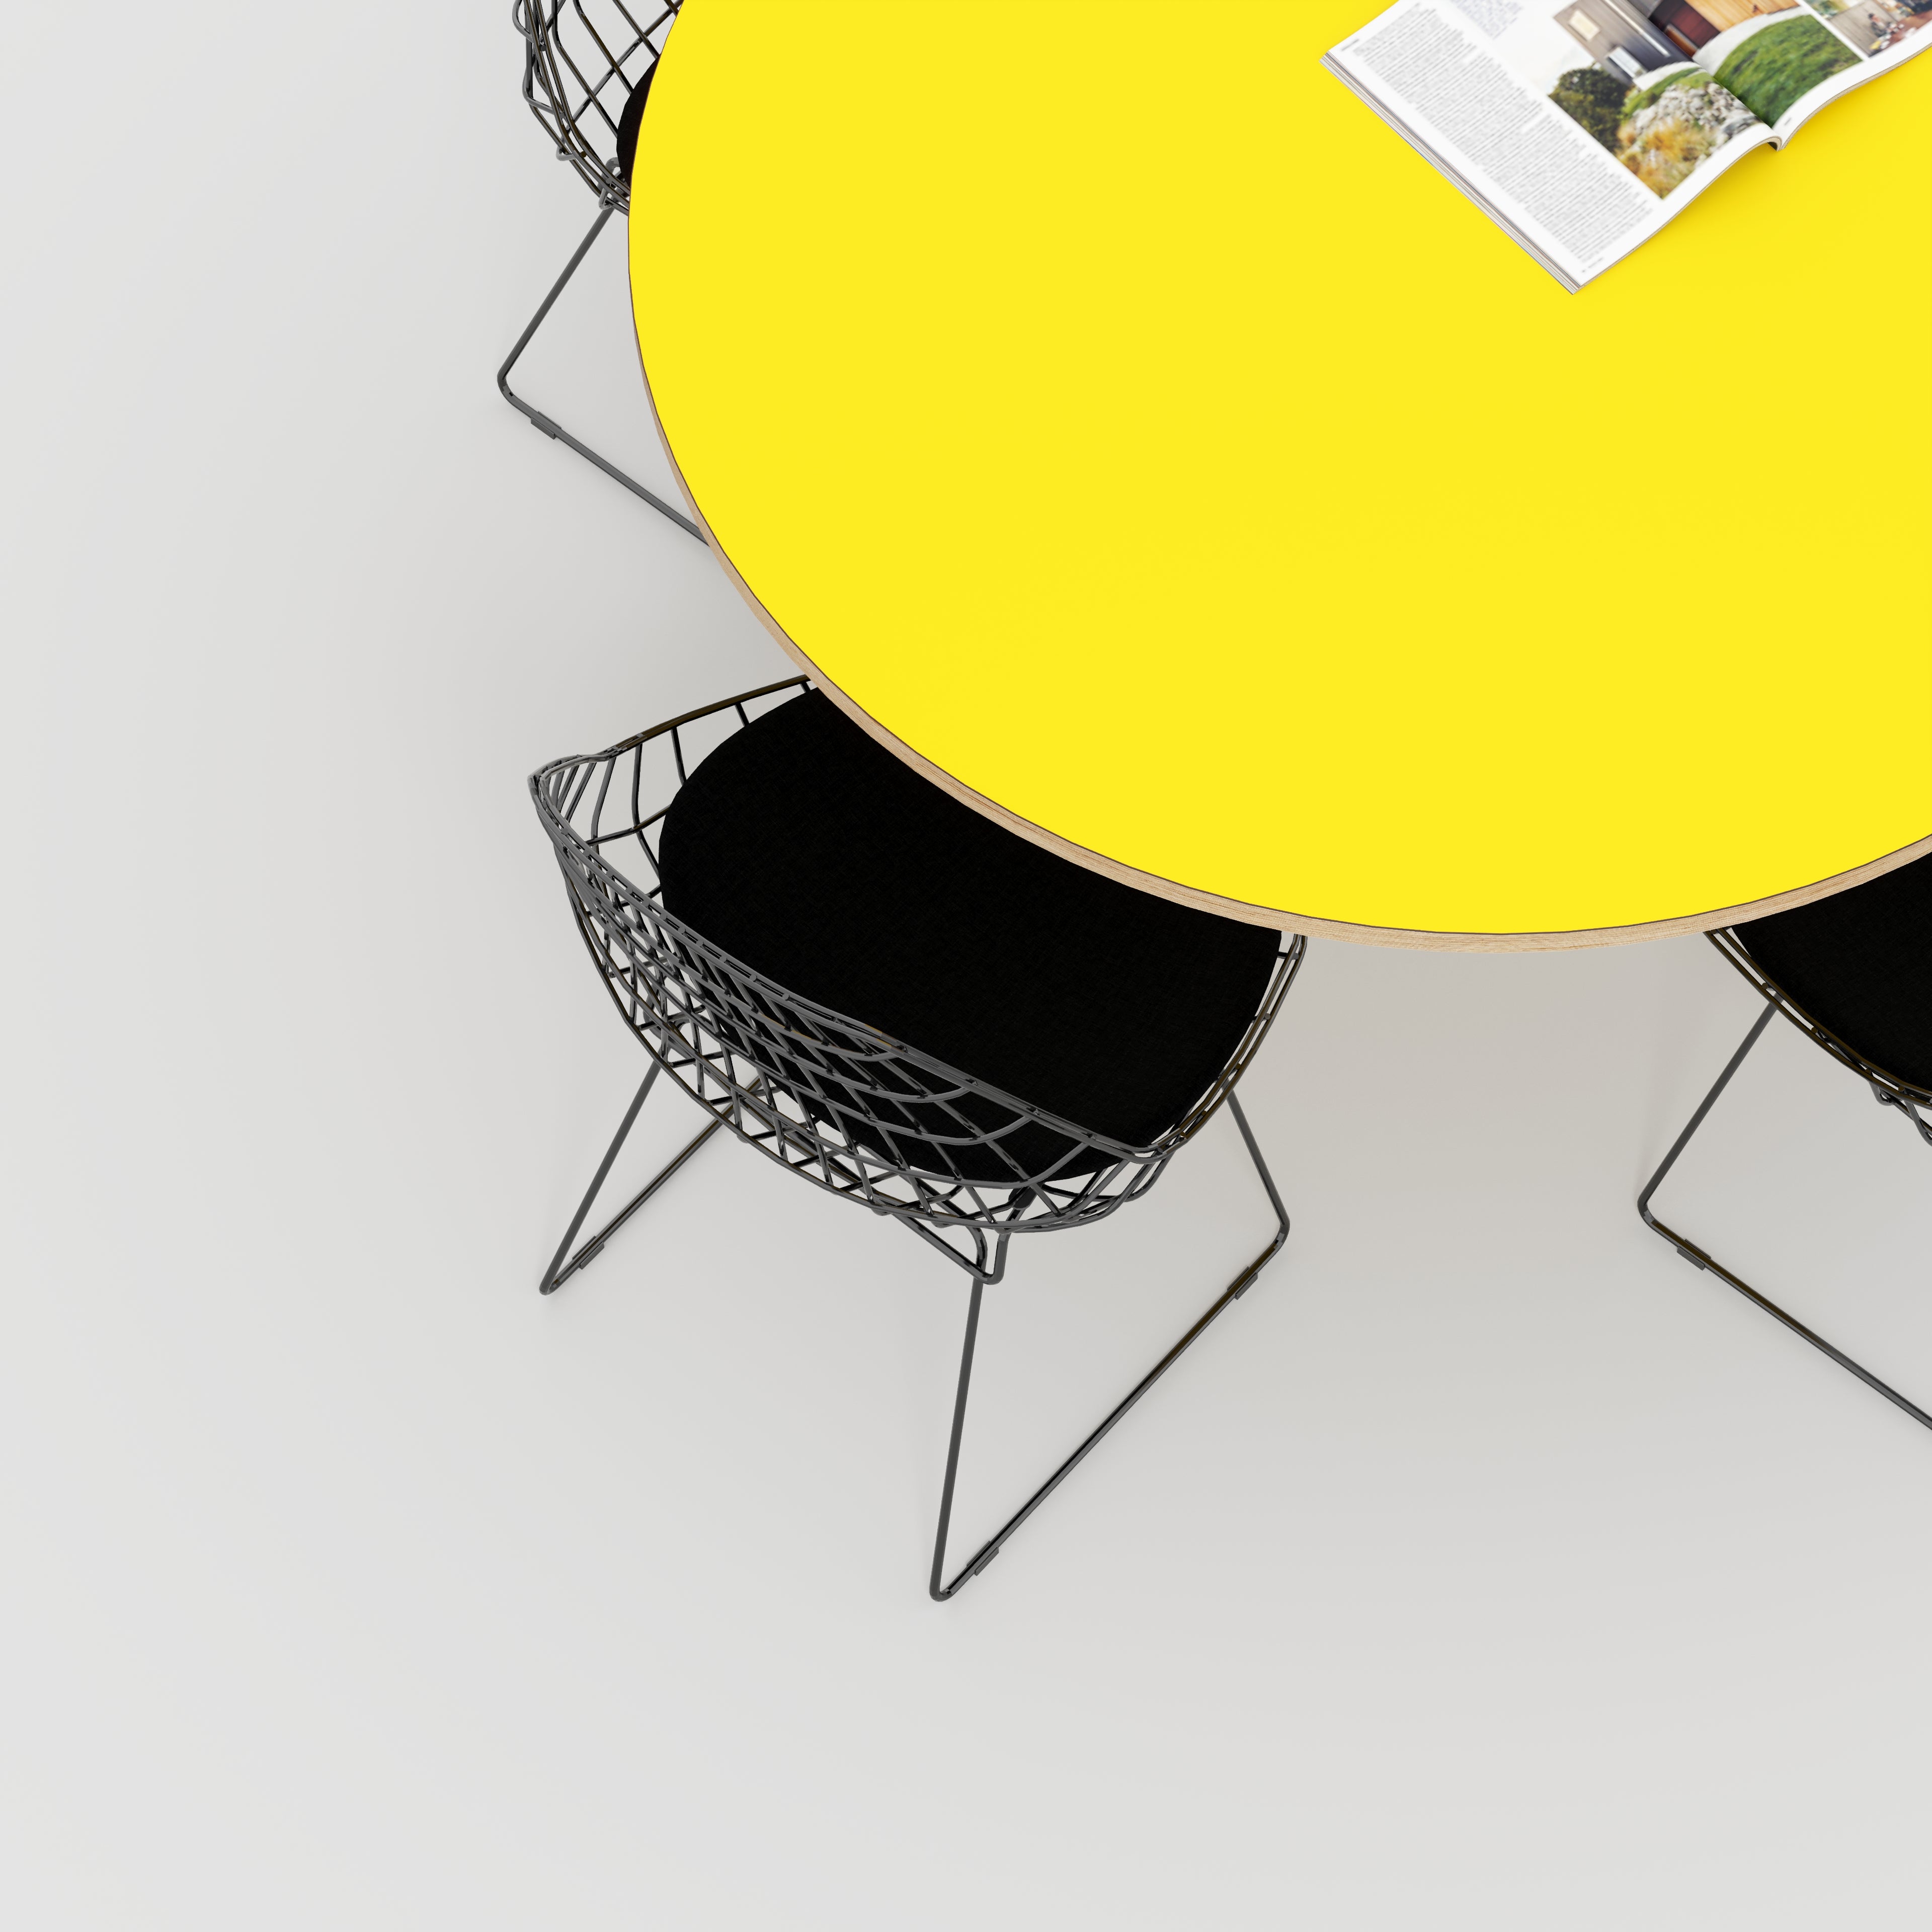 Plywood Round Tabletop - Formica Chrome Yellow - 1200(dia)